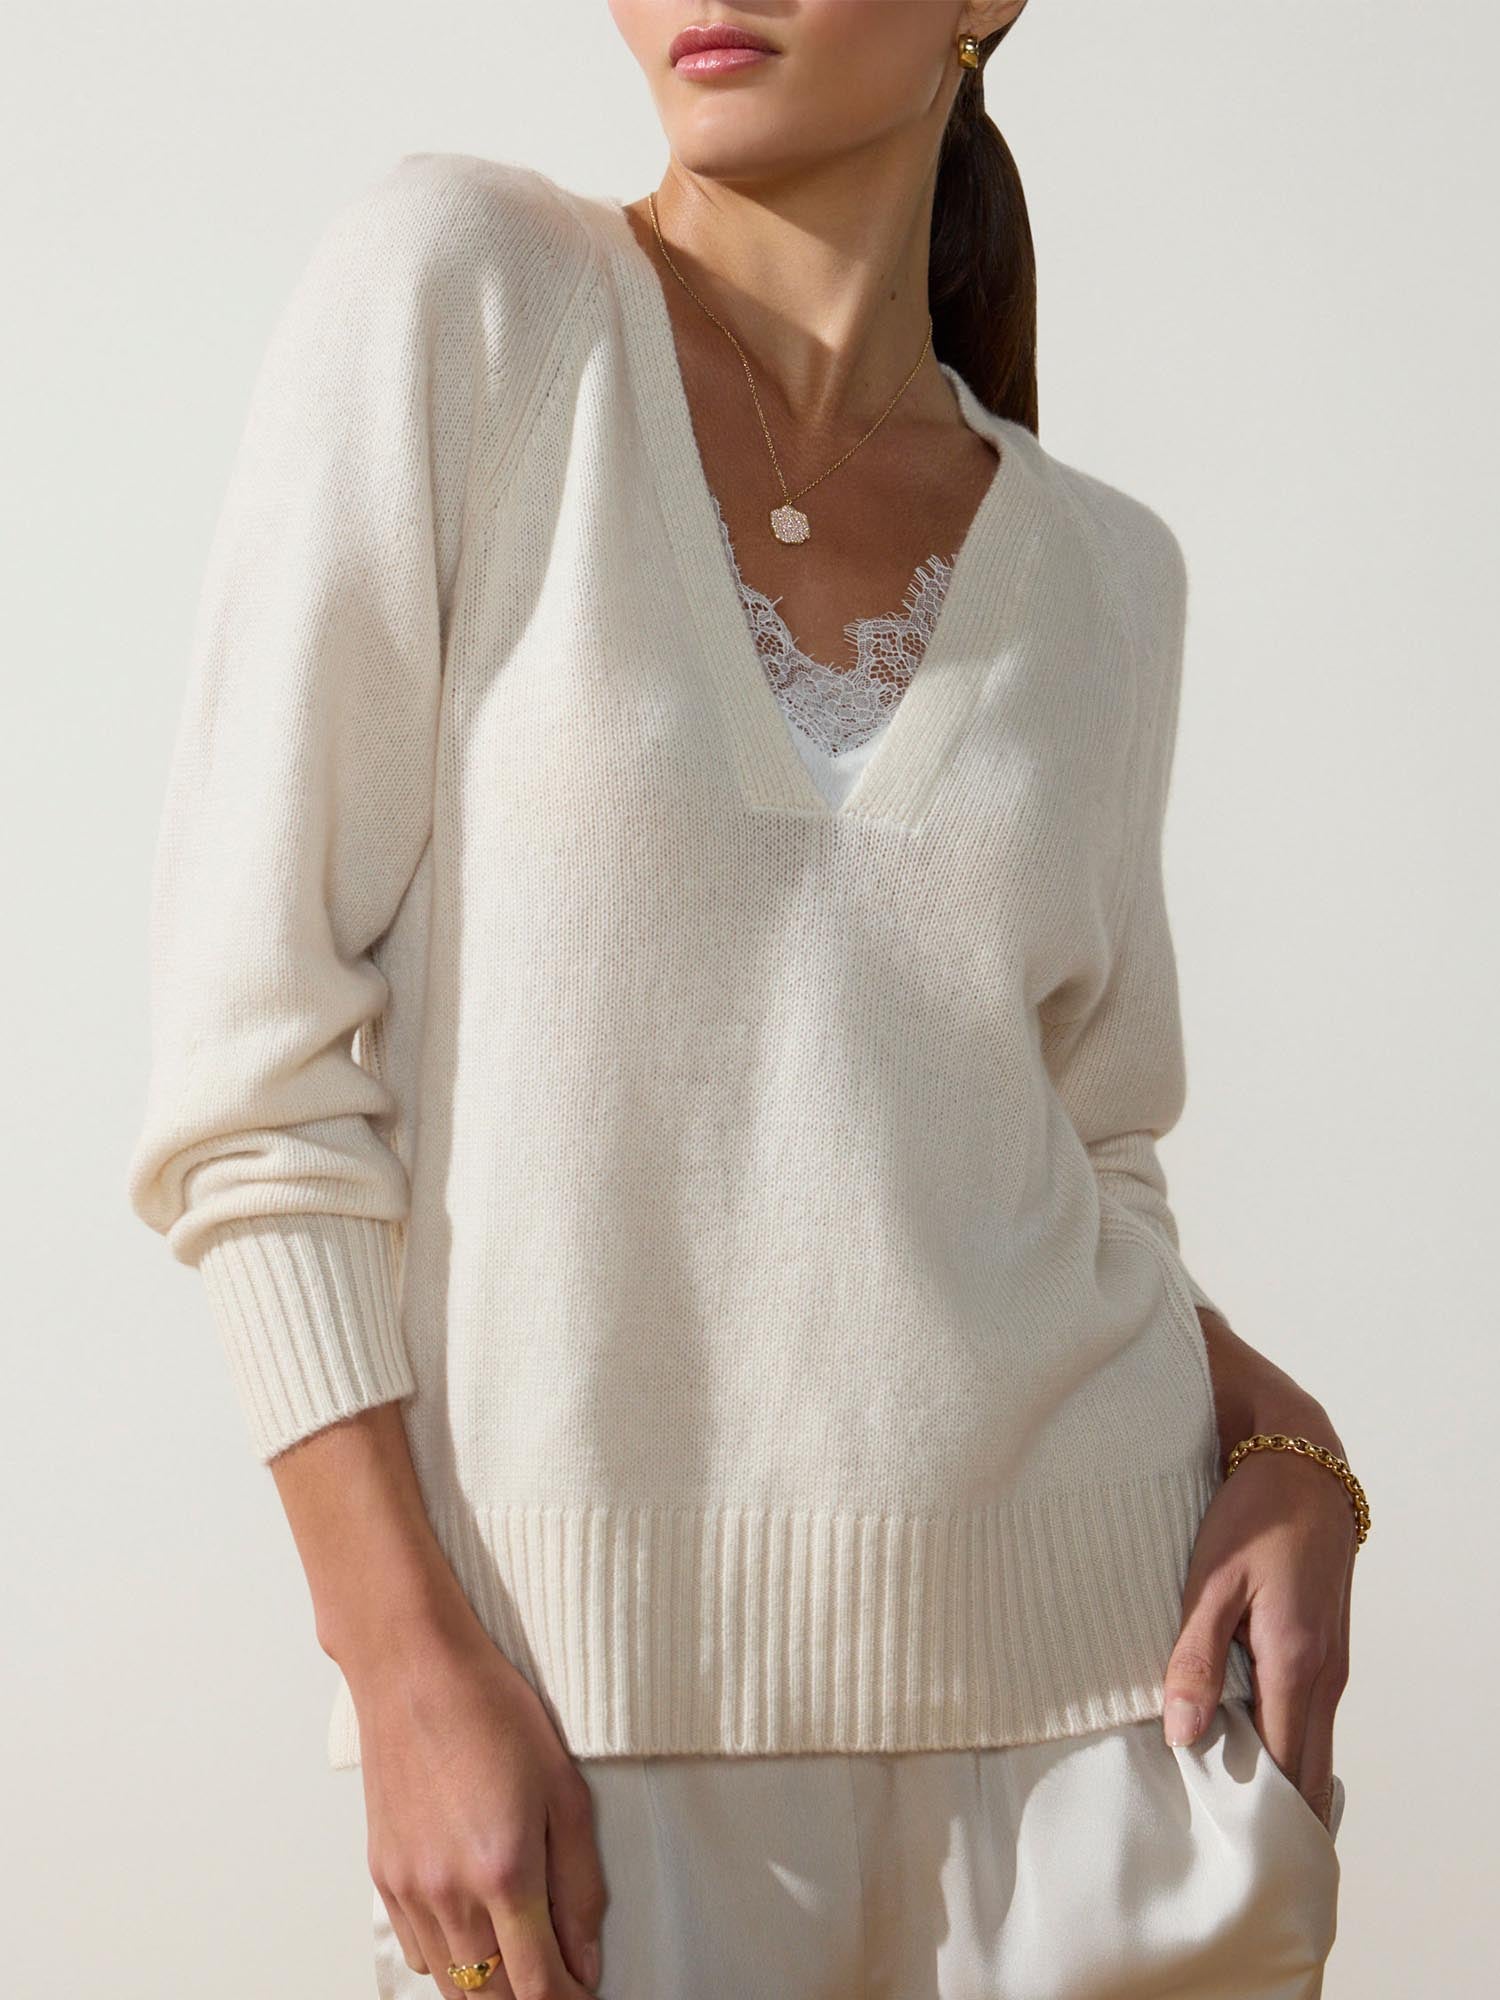 Ida white layered lace v-neck sweater front view